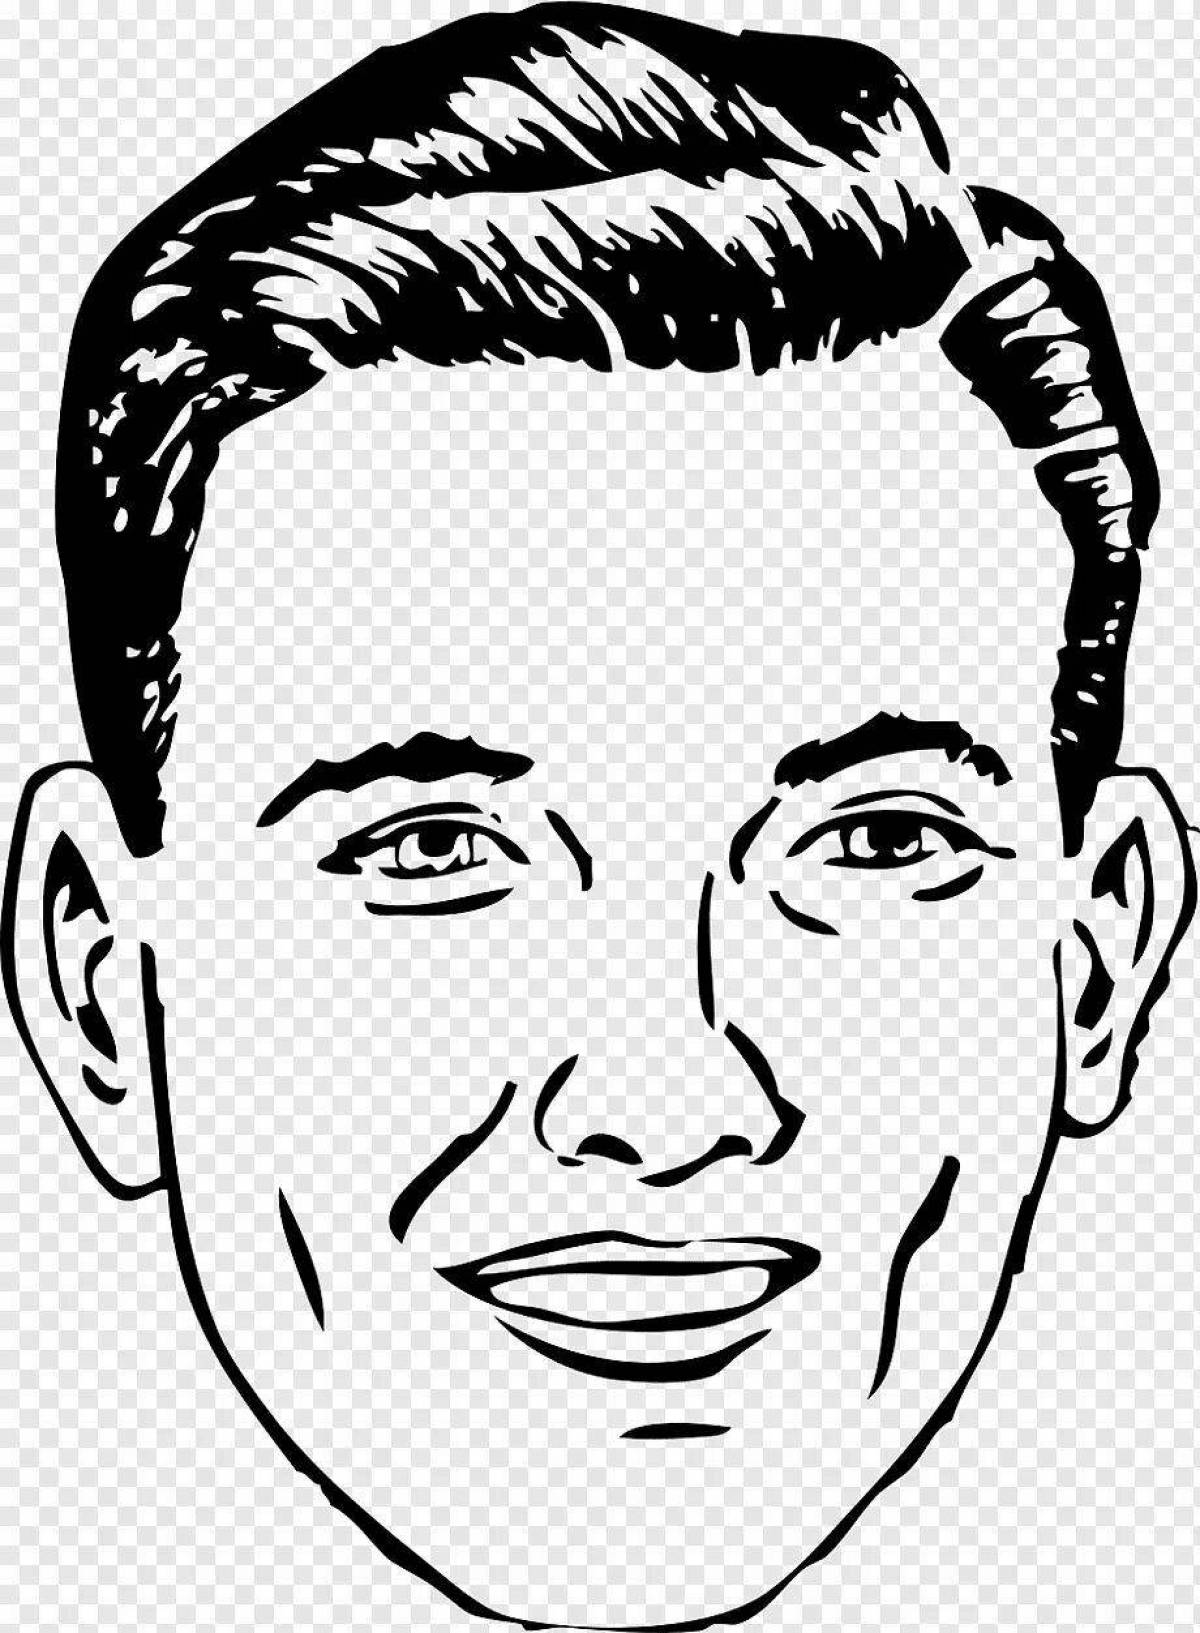 Adorable human face coloring page